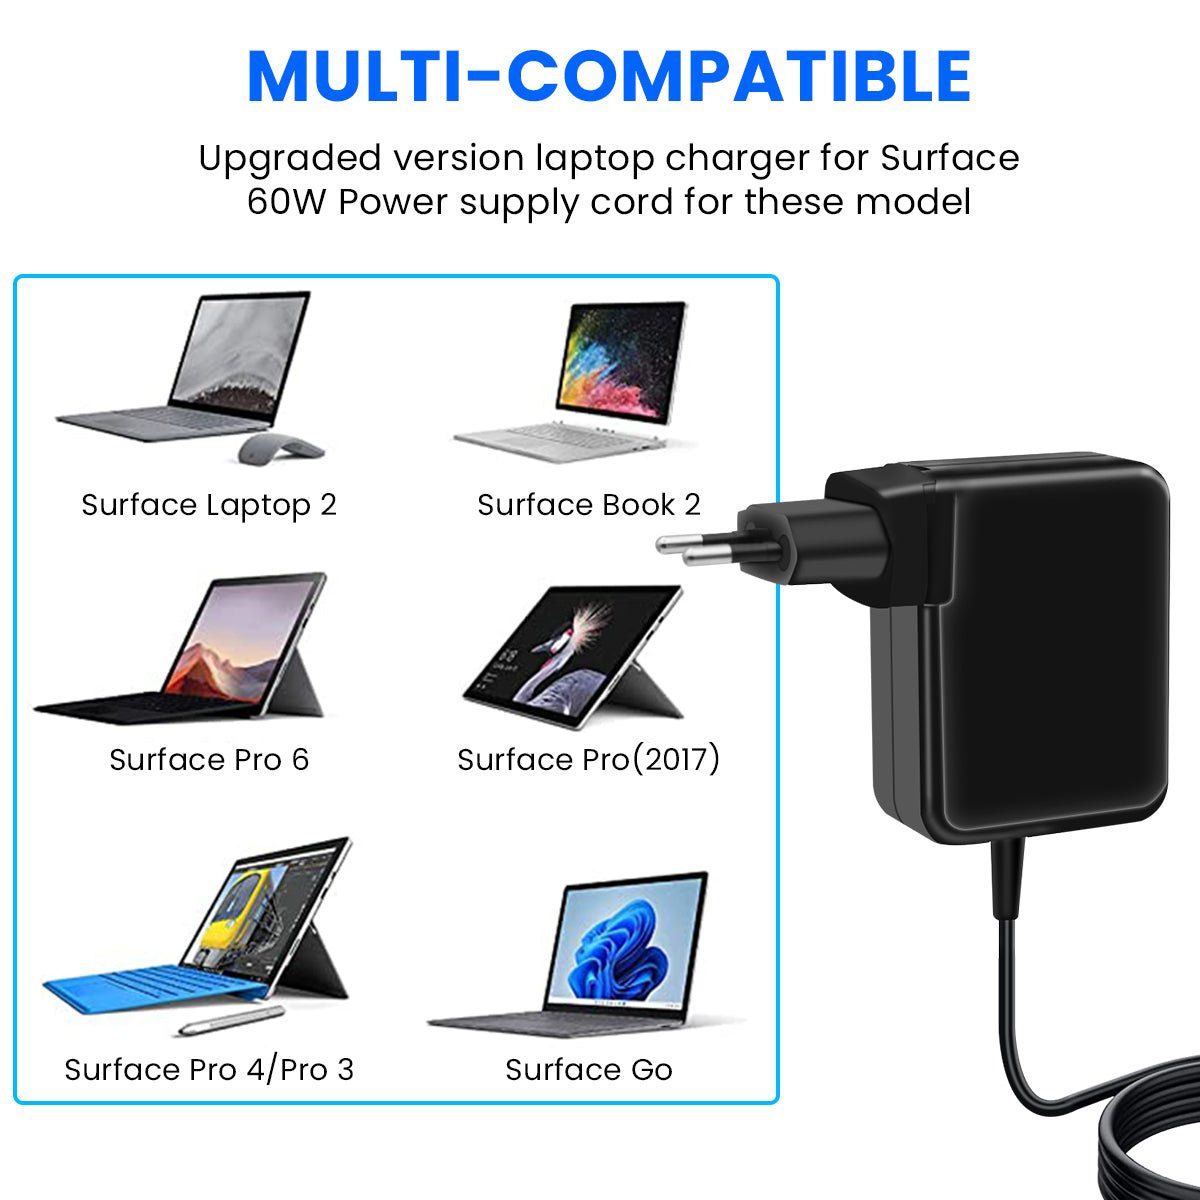 Verilux Surface Pro Charger, 60W DC Charger Adapter with Charging Cable for Microsoft Surface Pro 3/4/5/6/7 Surface Pro X Surface Pro 8 Laptop 1/2/3 Surface Go 1/2, 15V/4A Surface Charger